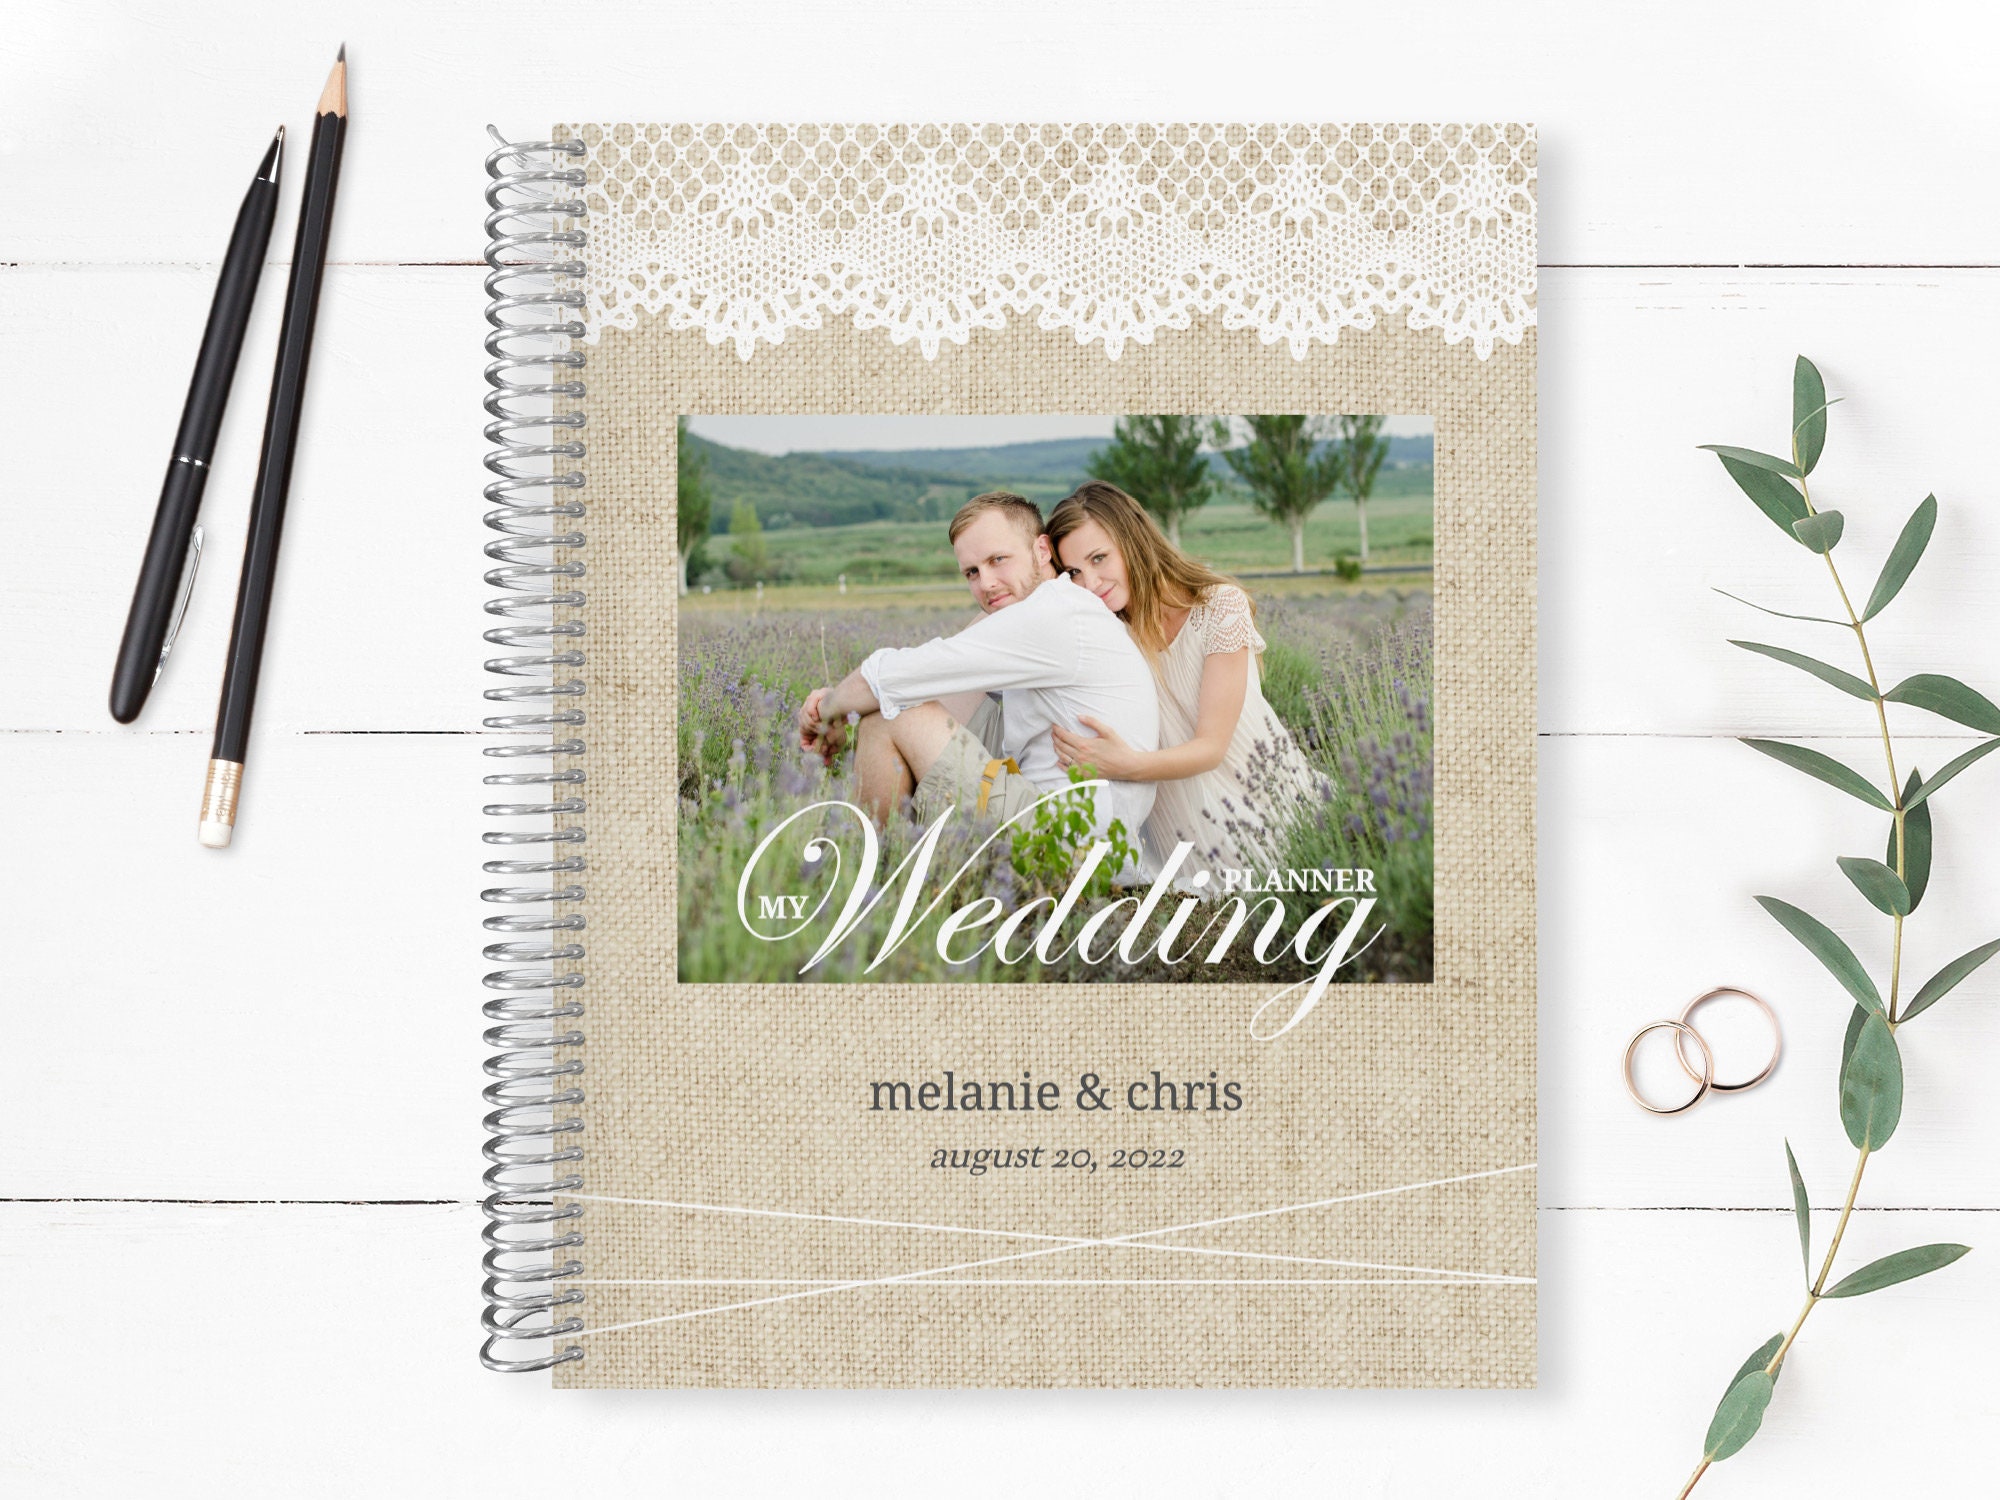 Complete Wedding Planner, Photo Printed On Cover, Customized With Name & Date, Organization, Rustic Design